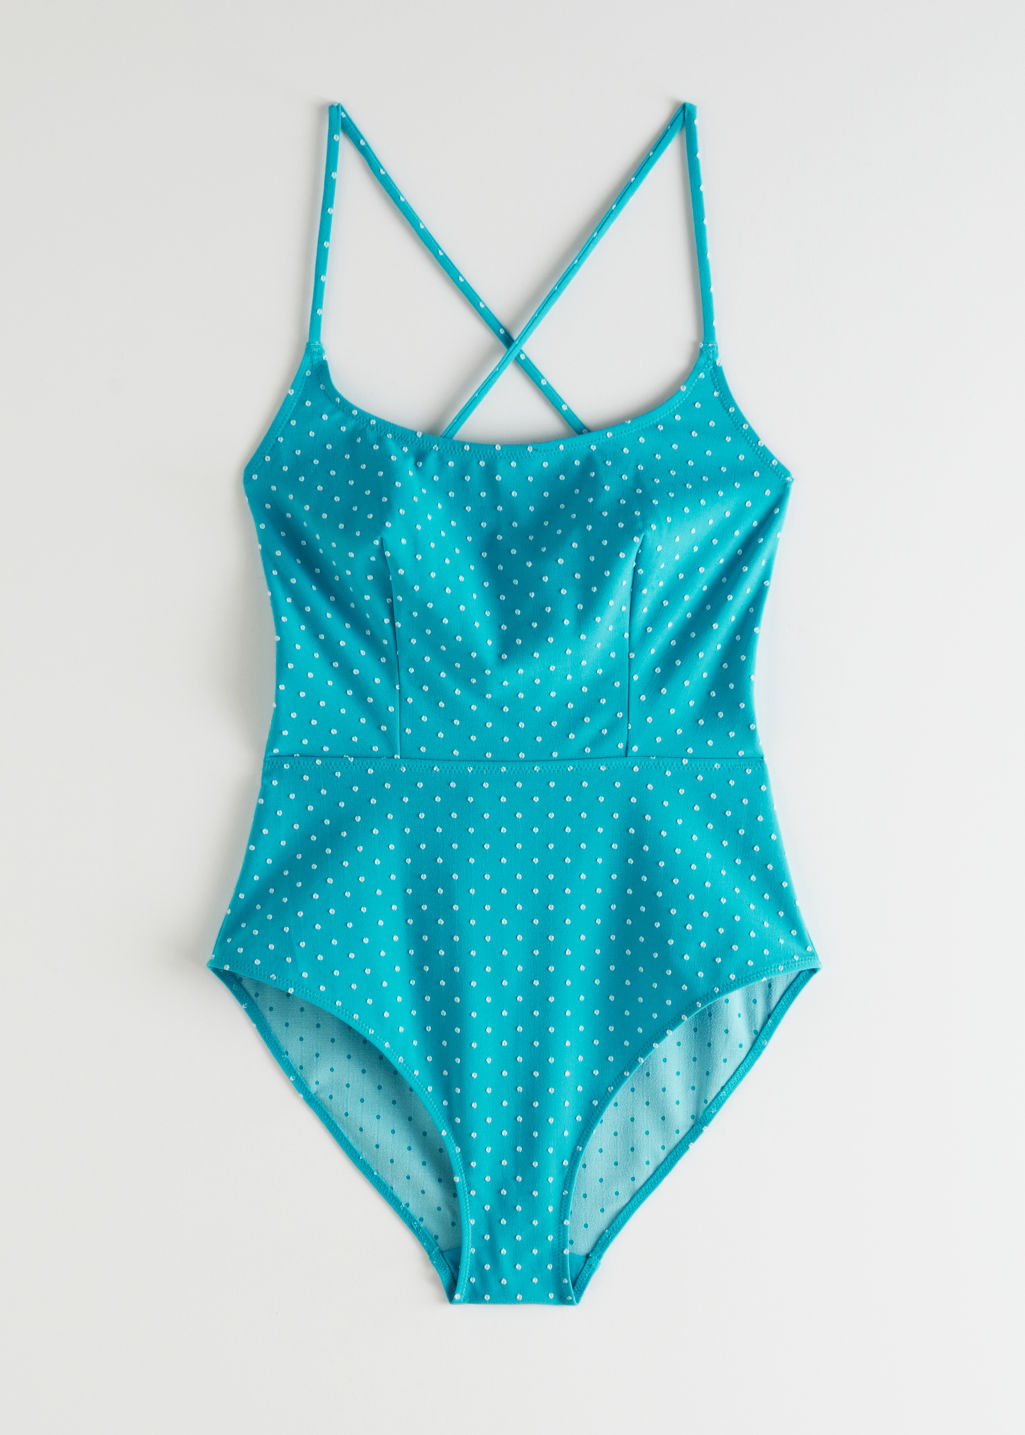 Criss Cross Polka Dot Swimsuit - Blue Dots - Swimsuits - & Other Stories